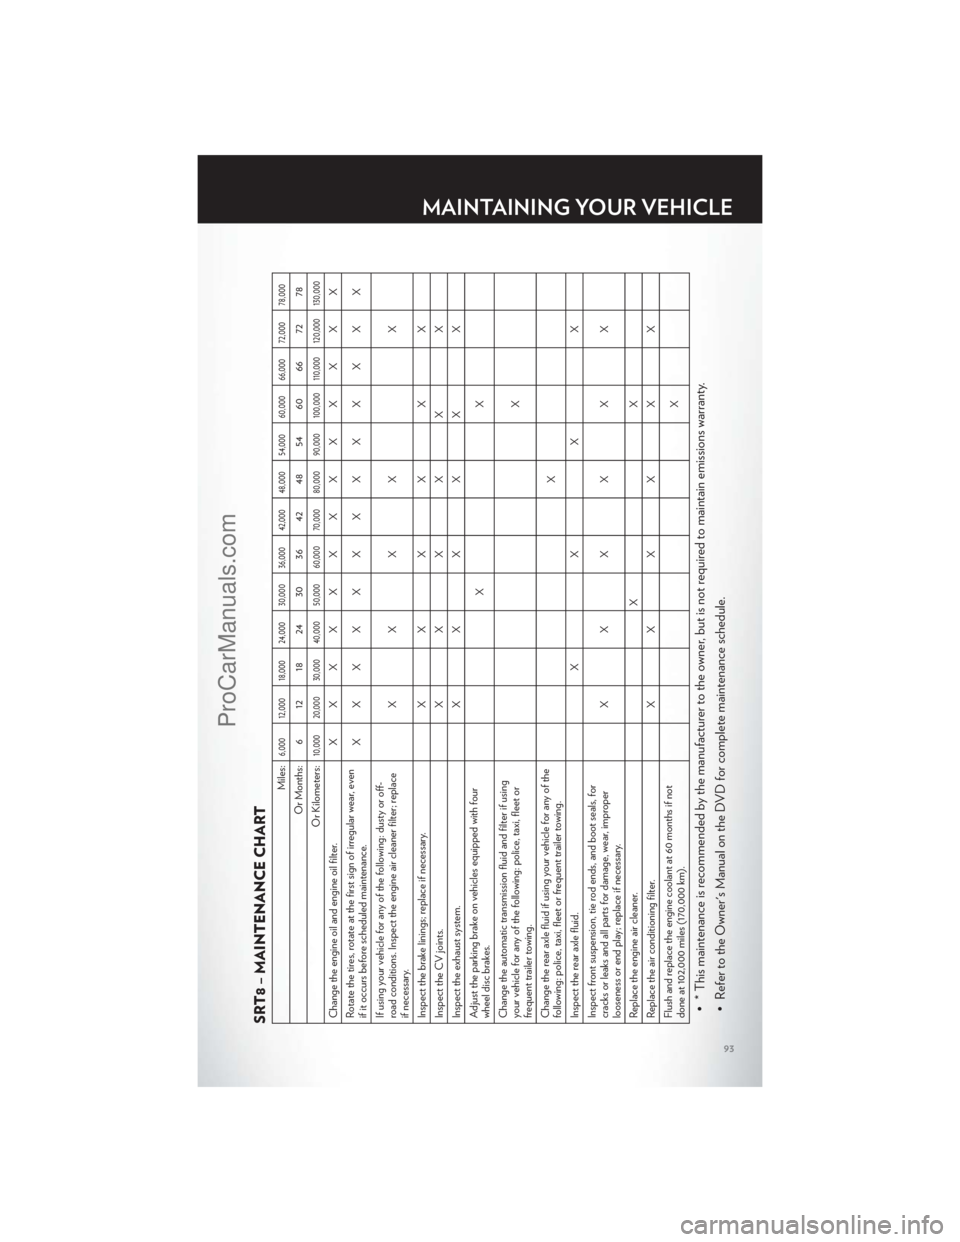 CHRYSLER 300 S 2012  Owners Manual SRT8 – MAINTENANCE CHART
Miles:
6,000 12,000 18,000 24,000 30,000 36,000 42,000 48,000 54,000 60,000 66,000 72,000 78,000
Or Months: 6 12 18 24 30 36 42 48 54 60 66 72 78
Or Kilometers:
10,000 20,00